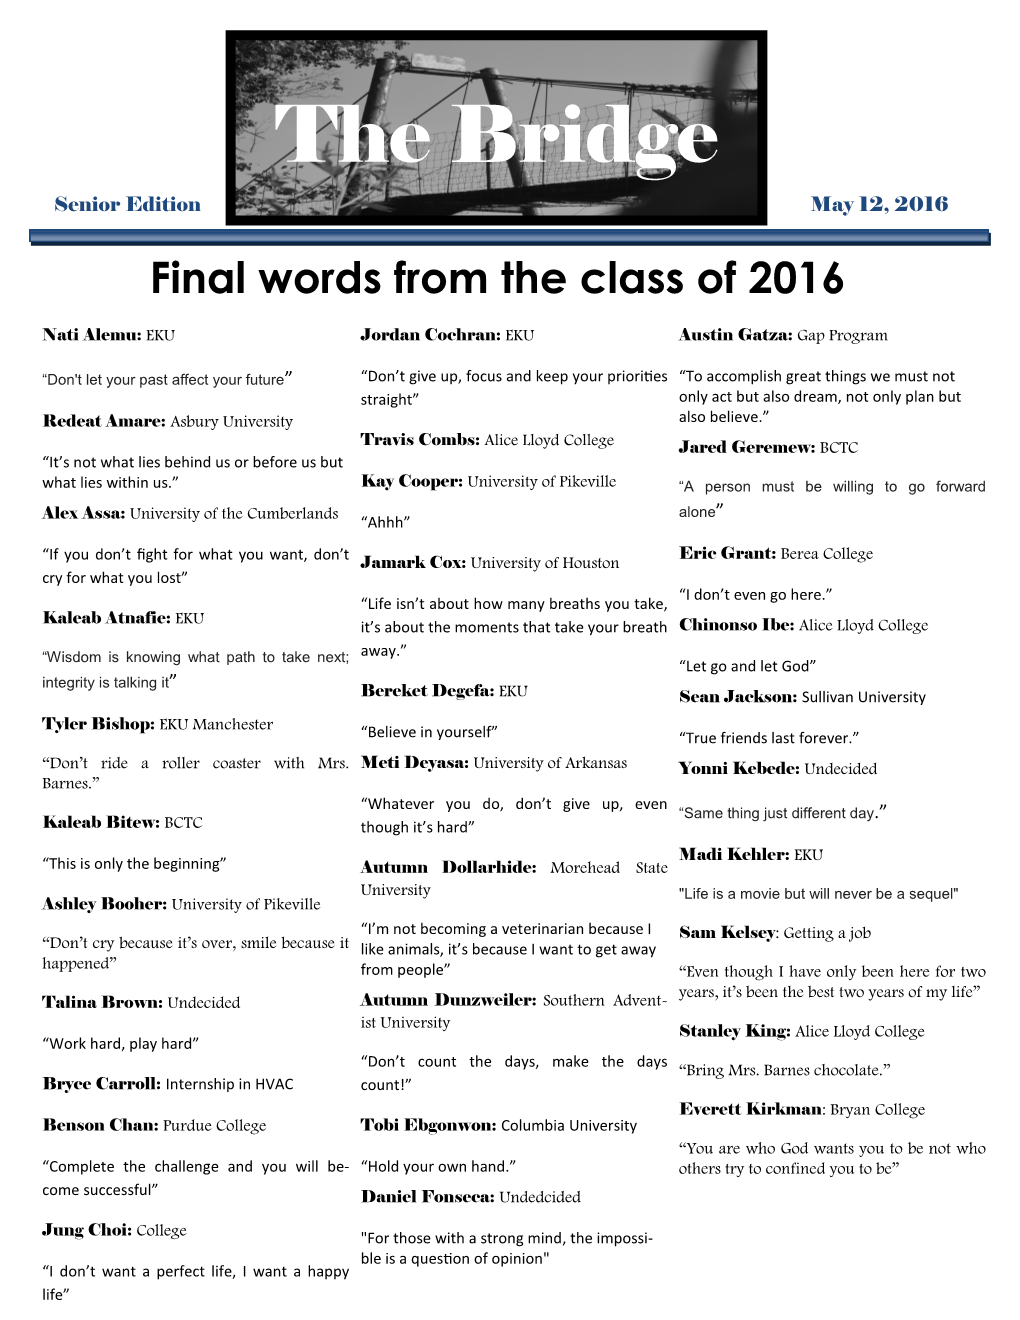 The Bridge Senior Edition May 12, 2016 Final Words from the Class of 2016